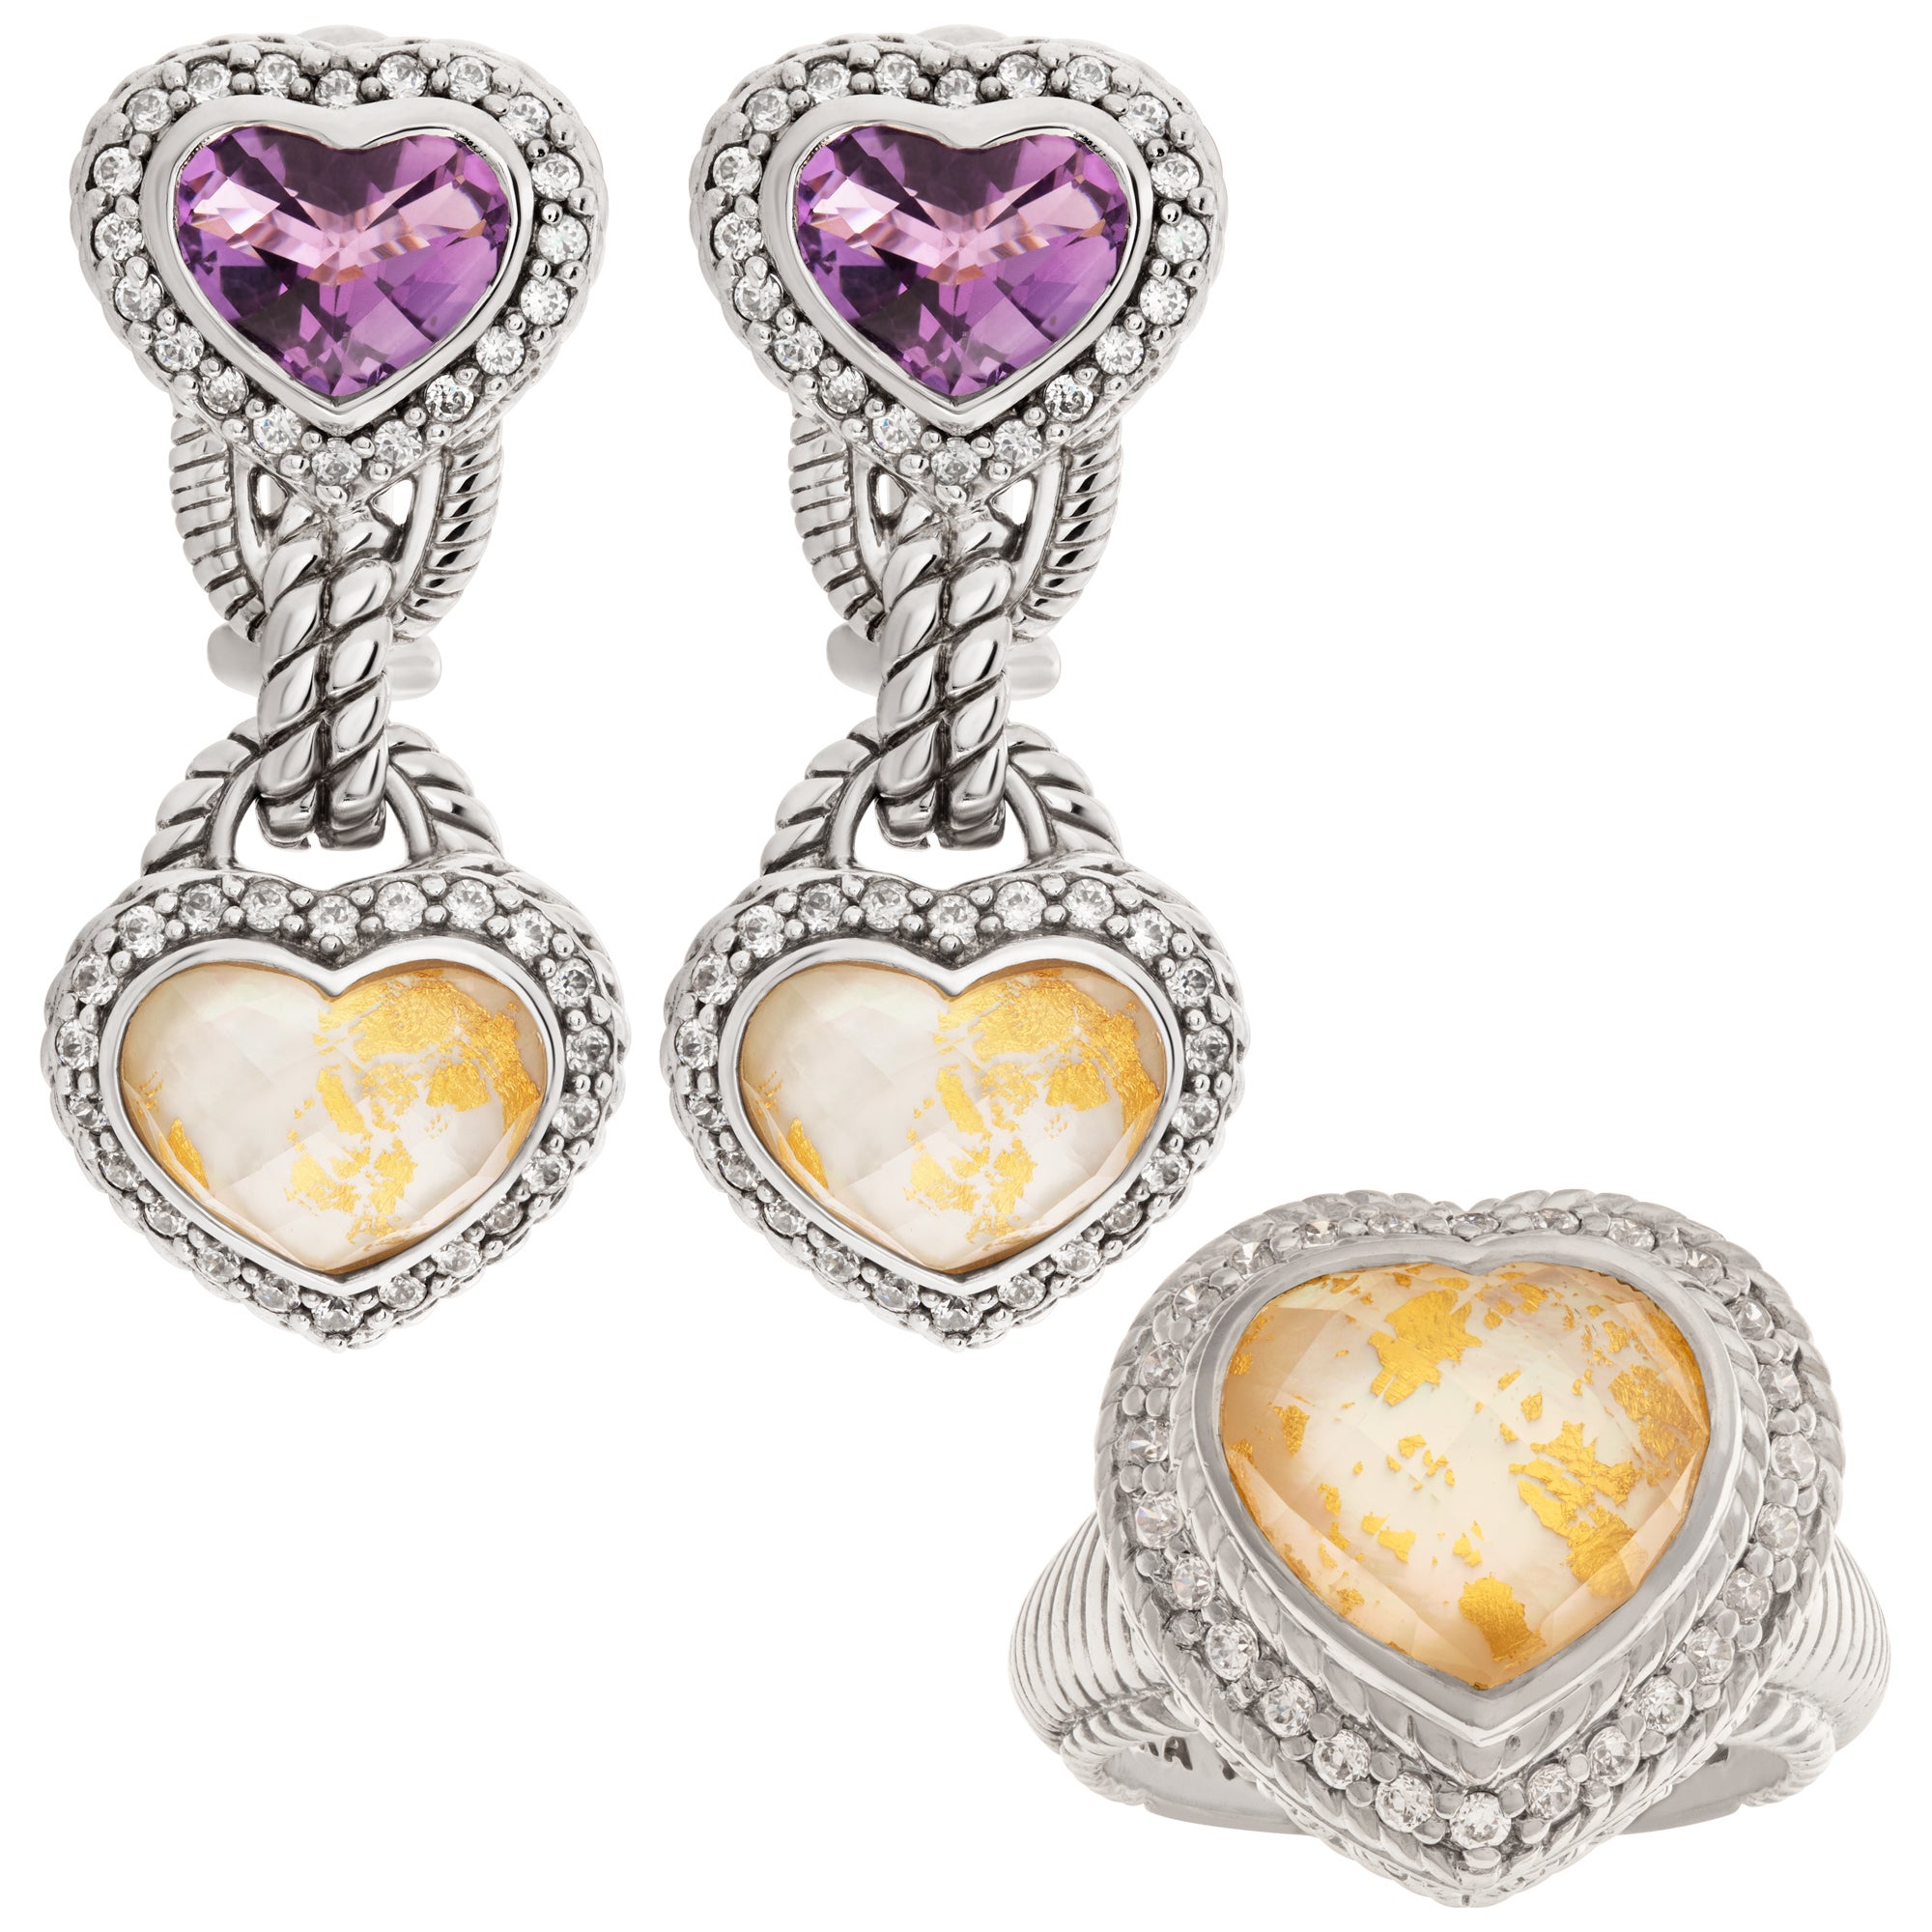 Judith Ripka Earrings and Ring Set Heart Shaped Amethyst and Gold Leaf Doublet For Sale